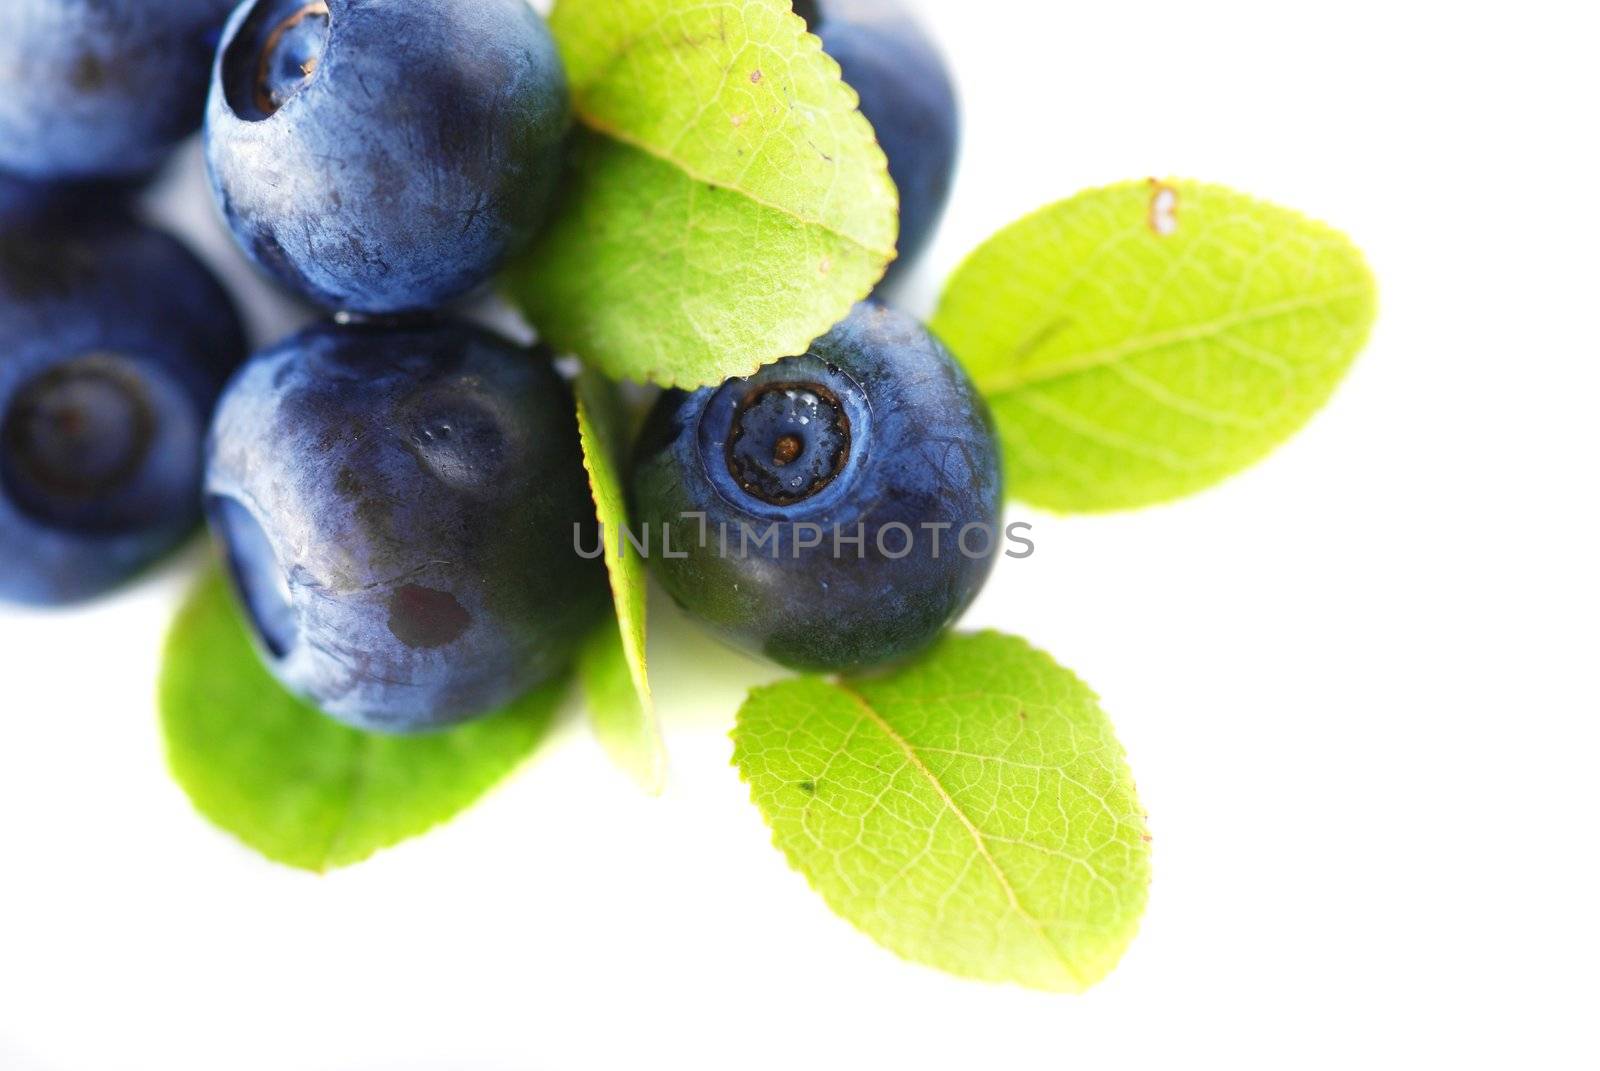 Blueberries by haveseen